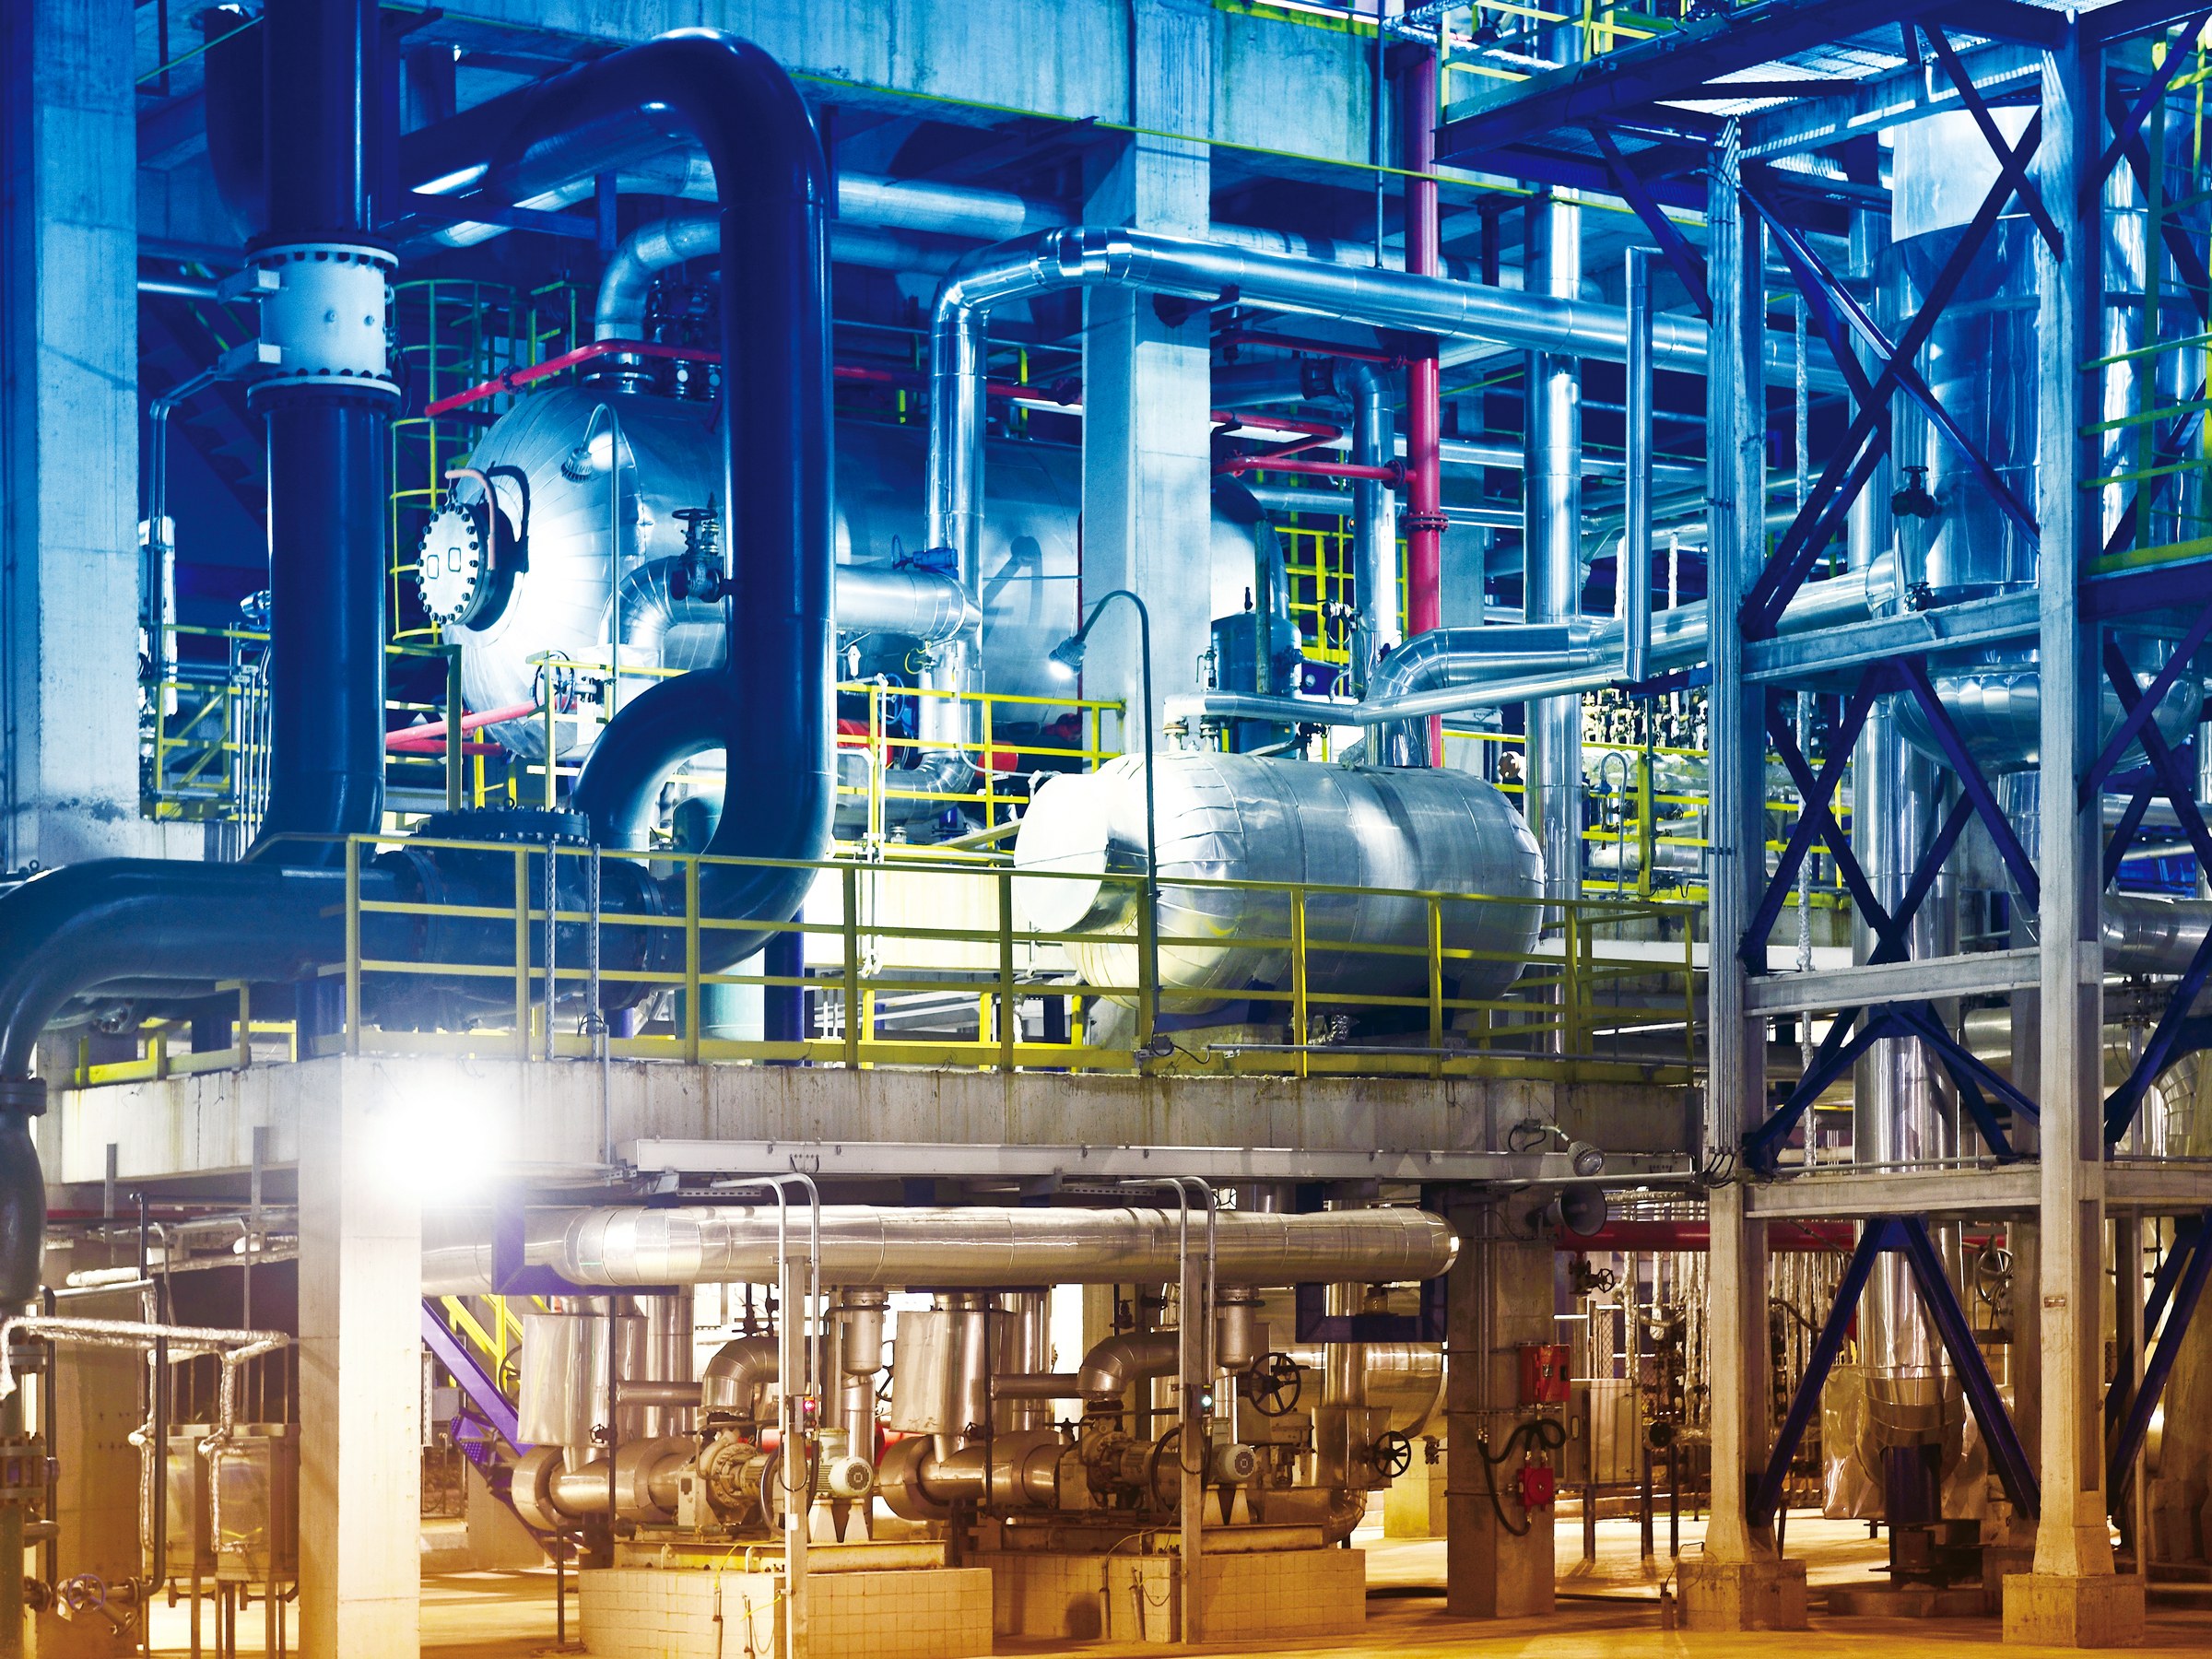 Triton Malware Details Show the Dangers of Industrial System ...